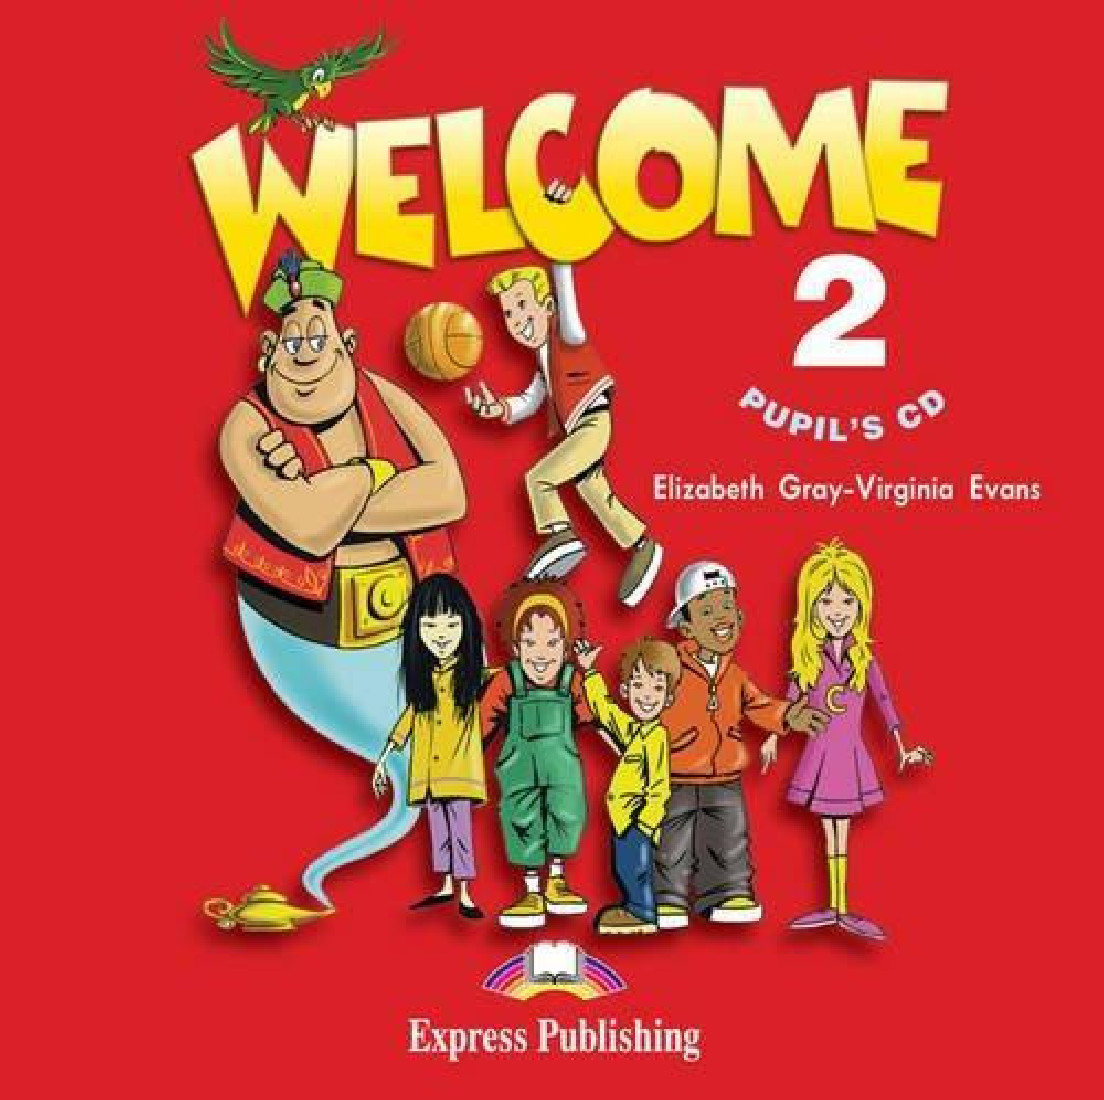 WELCOME 2 PUPILS CD